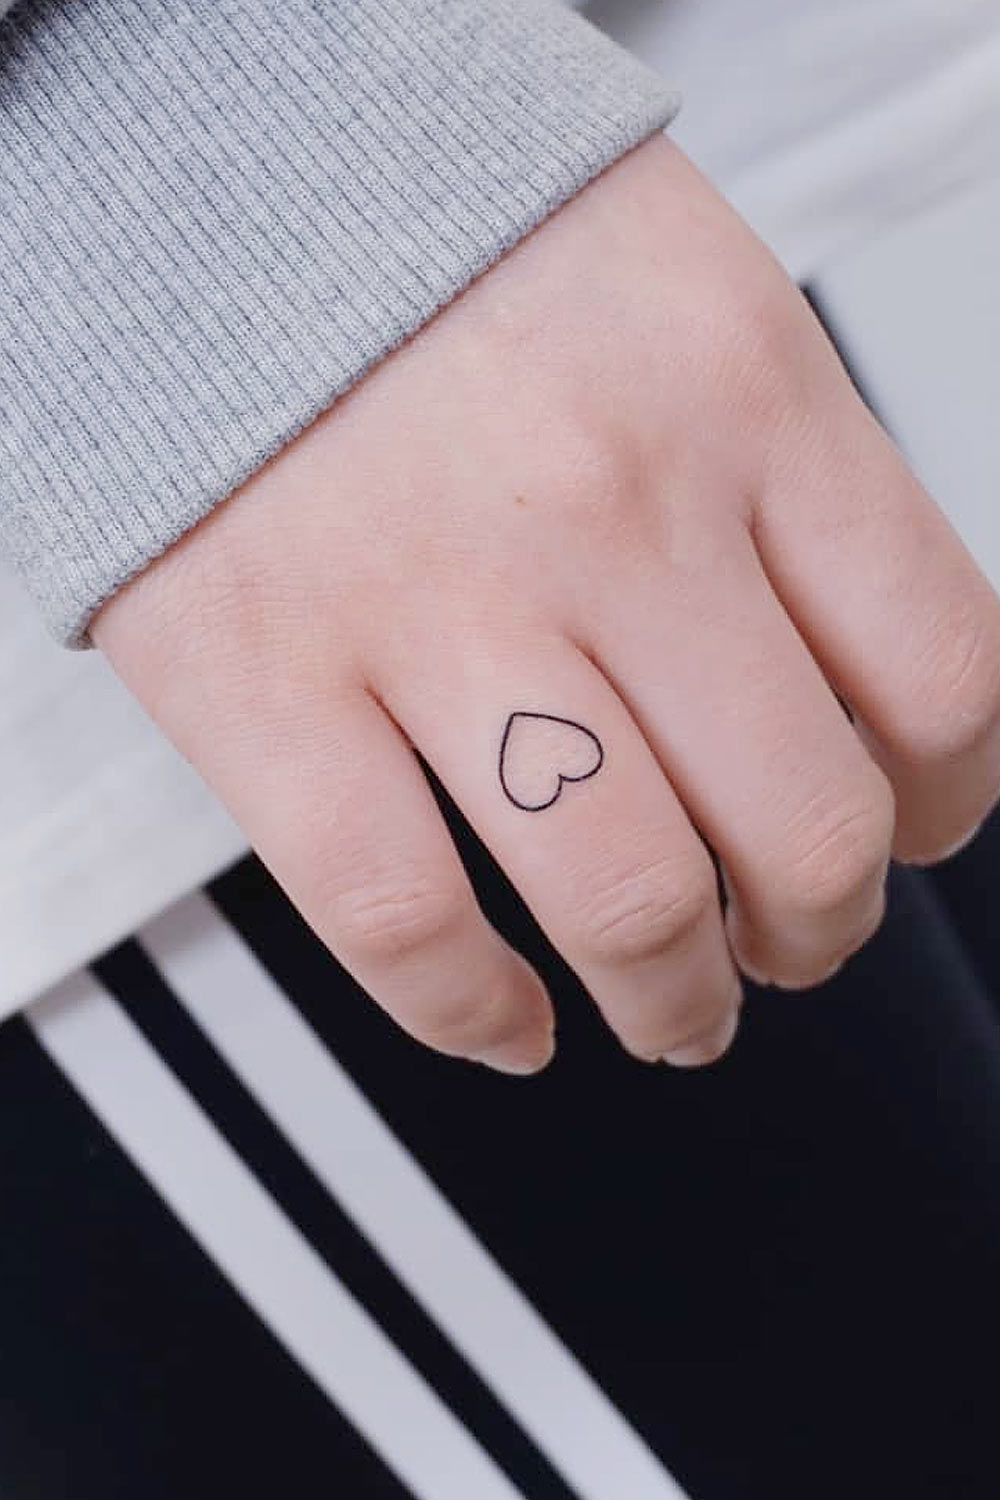 45 Meaningful Tiny Finger Tattoo Ideas Every Woman Eager To Paint! -  Fashionsum | Small finger tattoos, Small hand tattoos, Hand tattoos